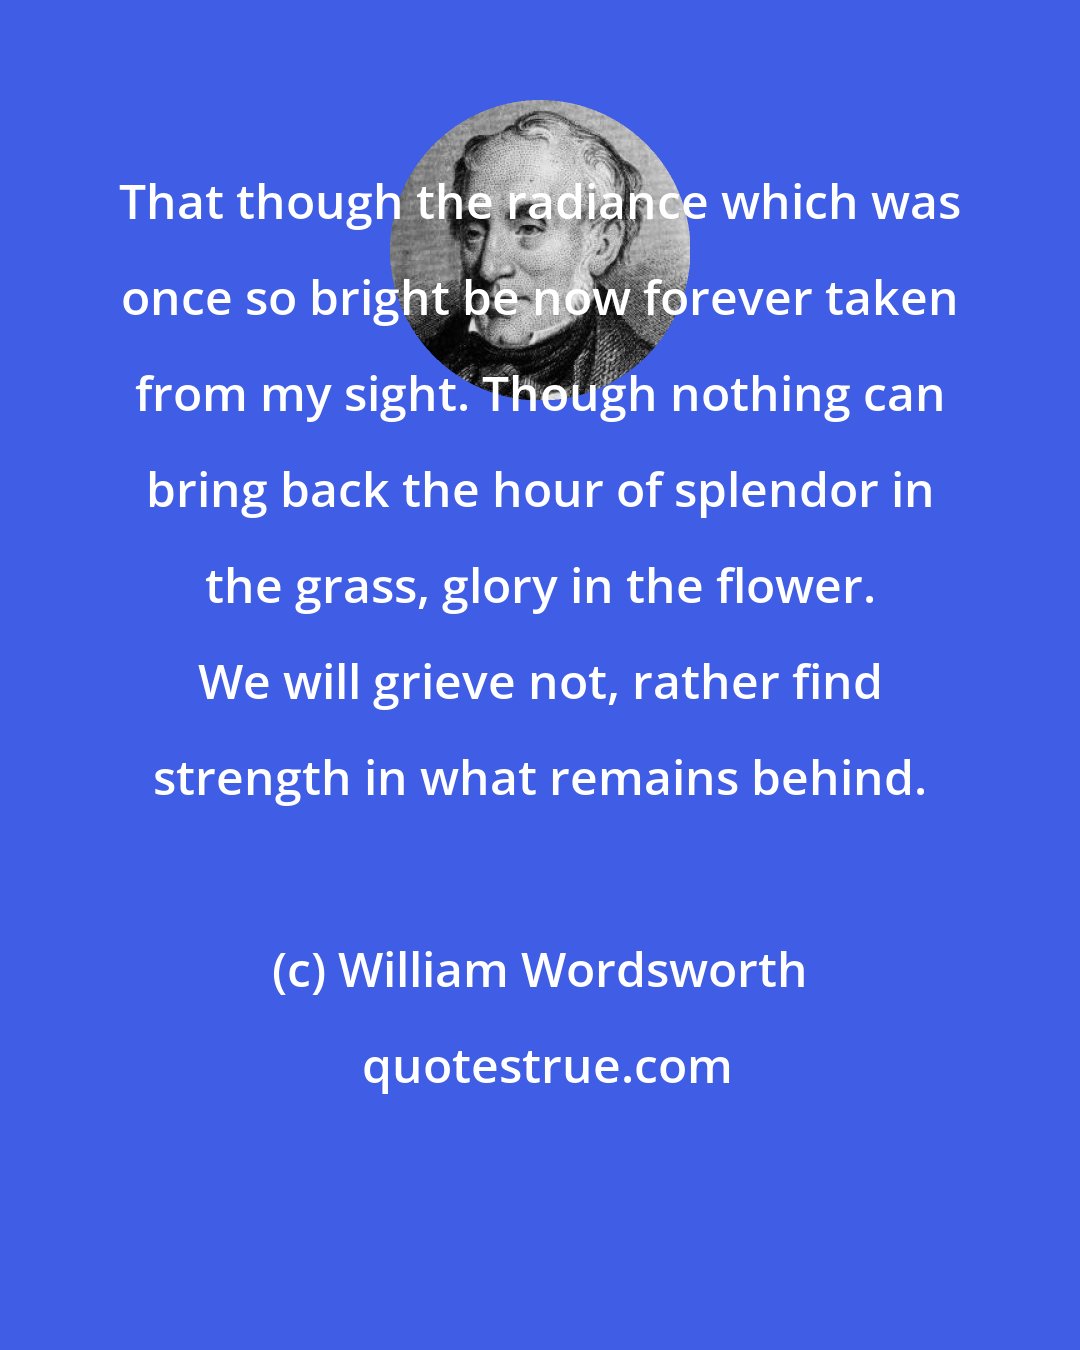 William Wordsworth: That though the radiance which was once so bright be now forever taken from my sight. Though nothing can bring back the hour of splendor in the grass, glory in the flower. We will grieve not, rather find strength in what remains behind.